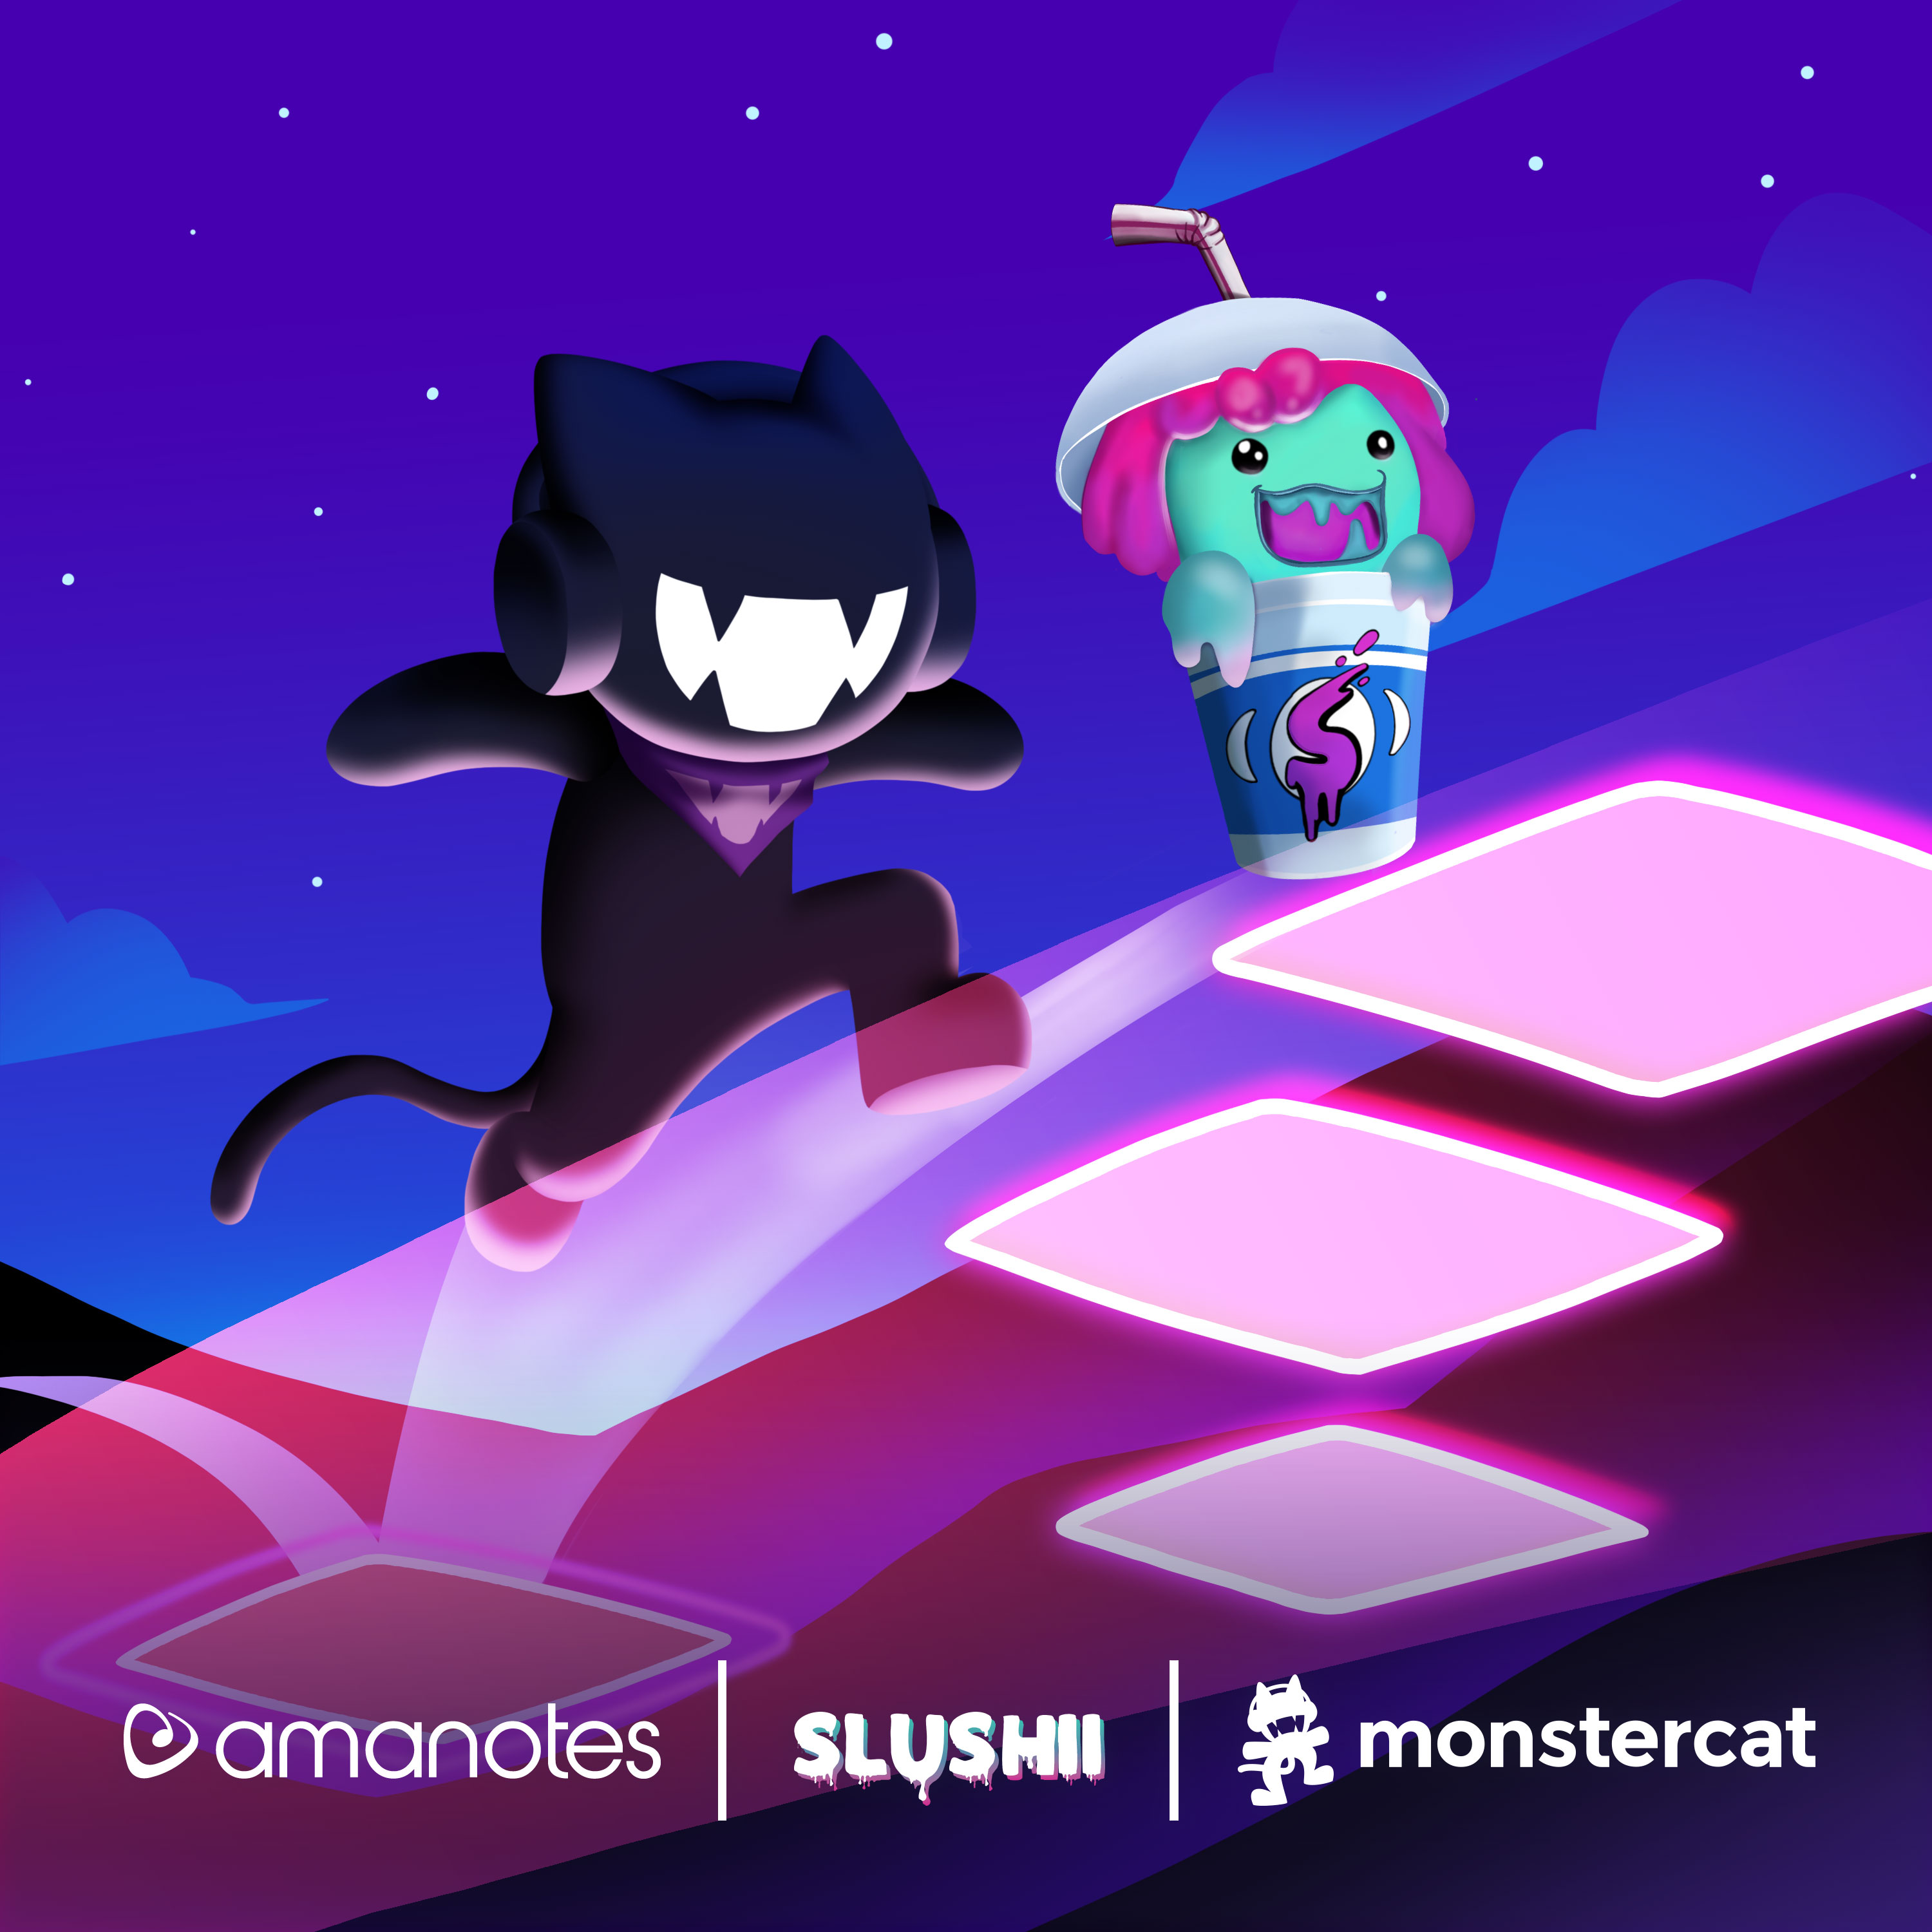 osu! on X: in partnership with @Monstercat, we're excited to